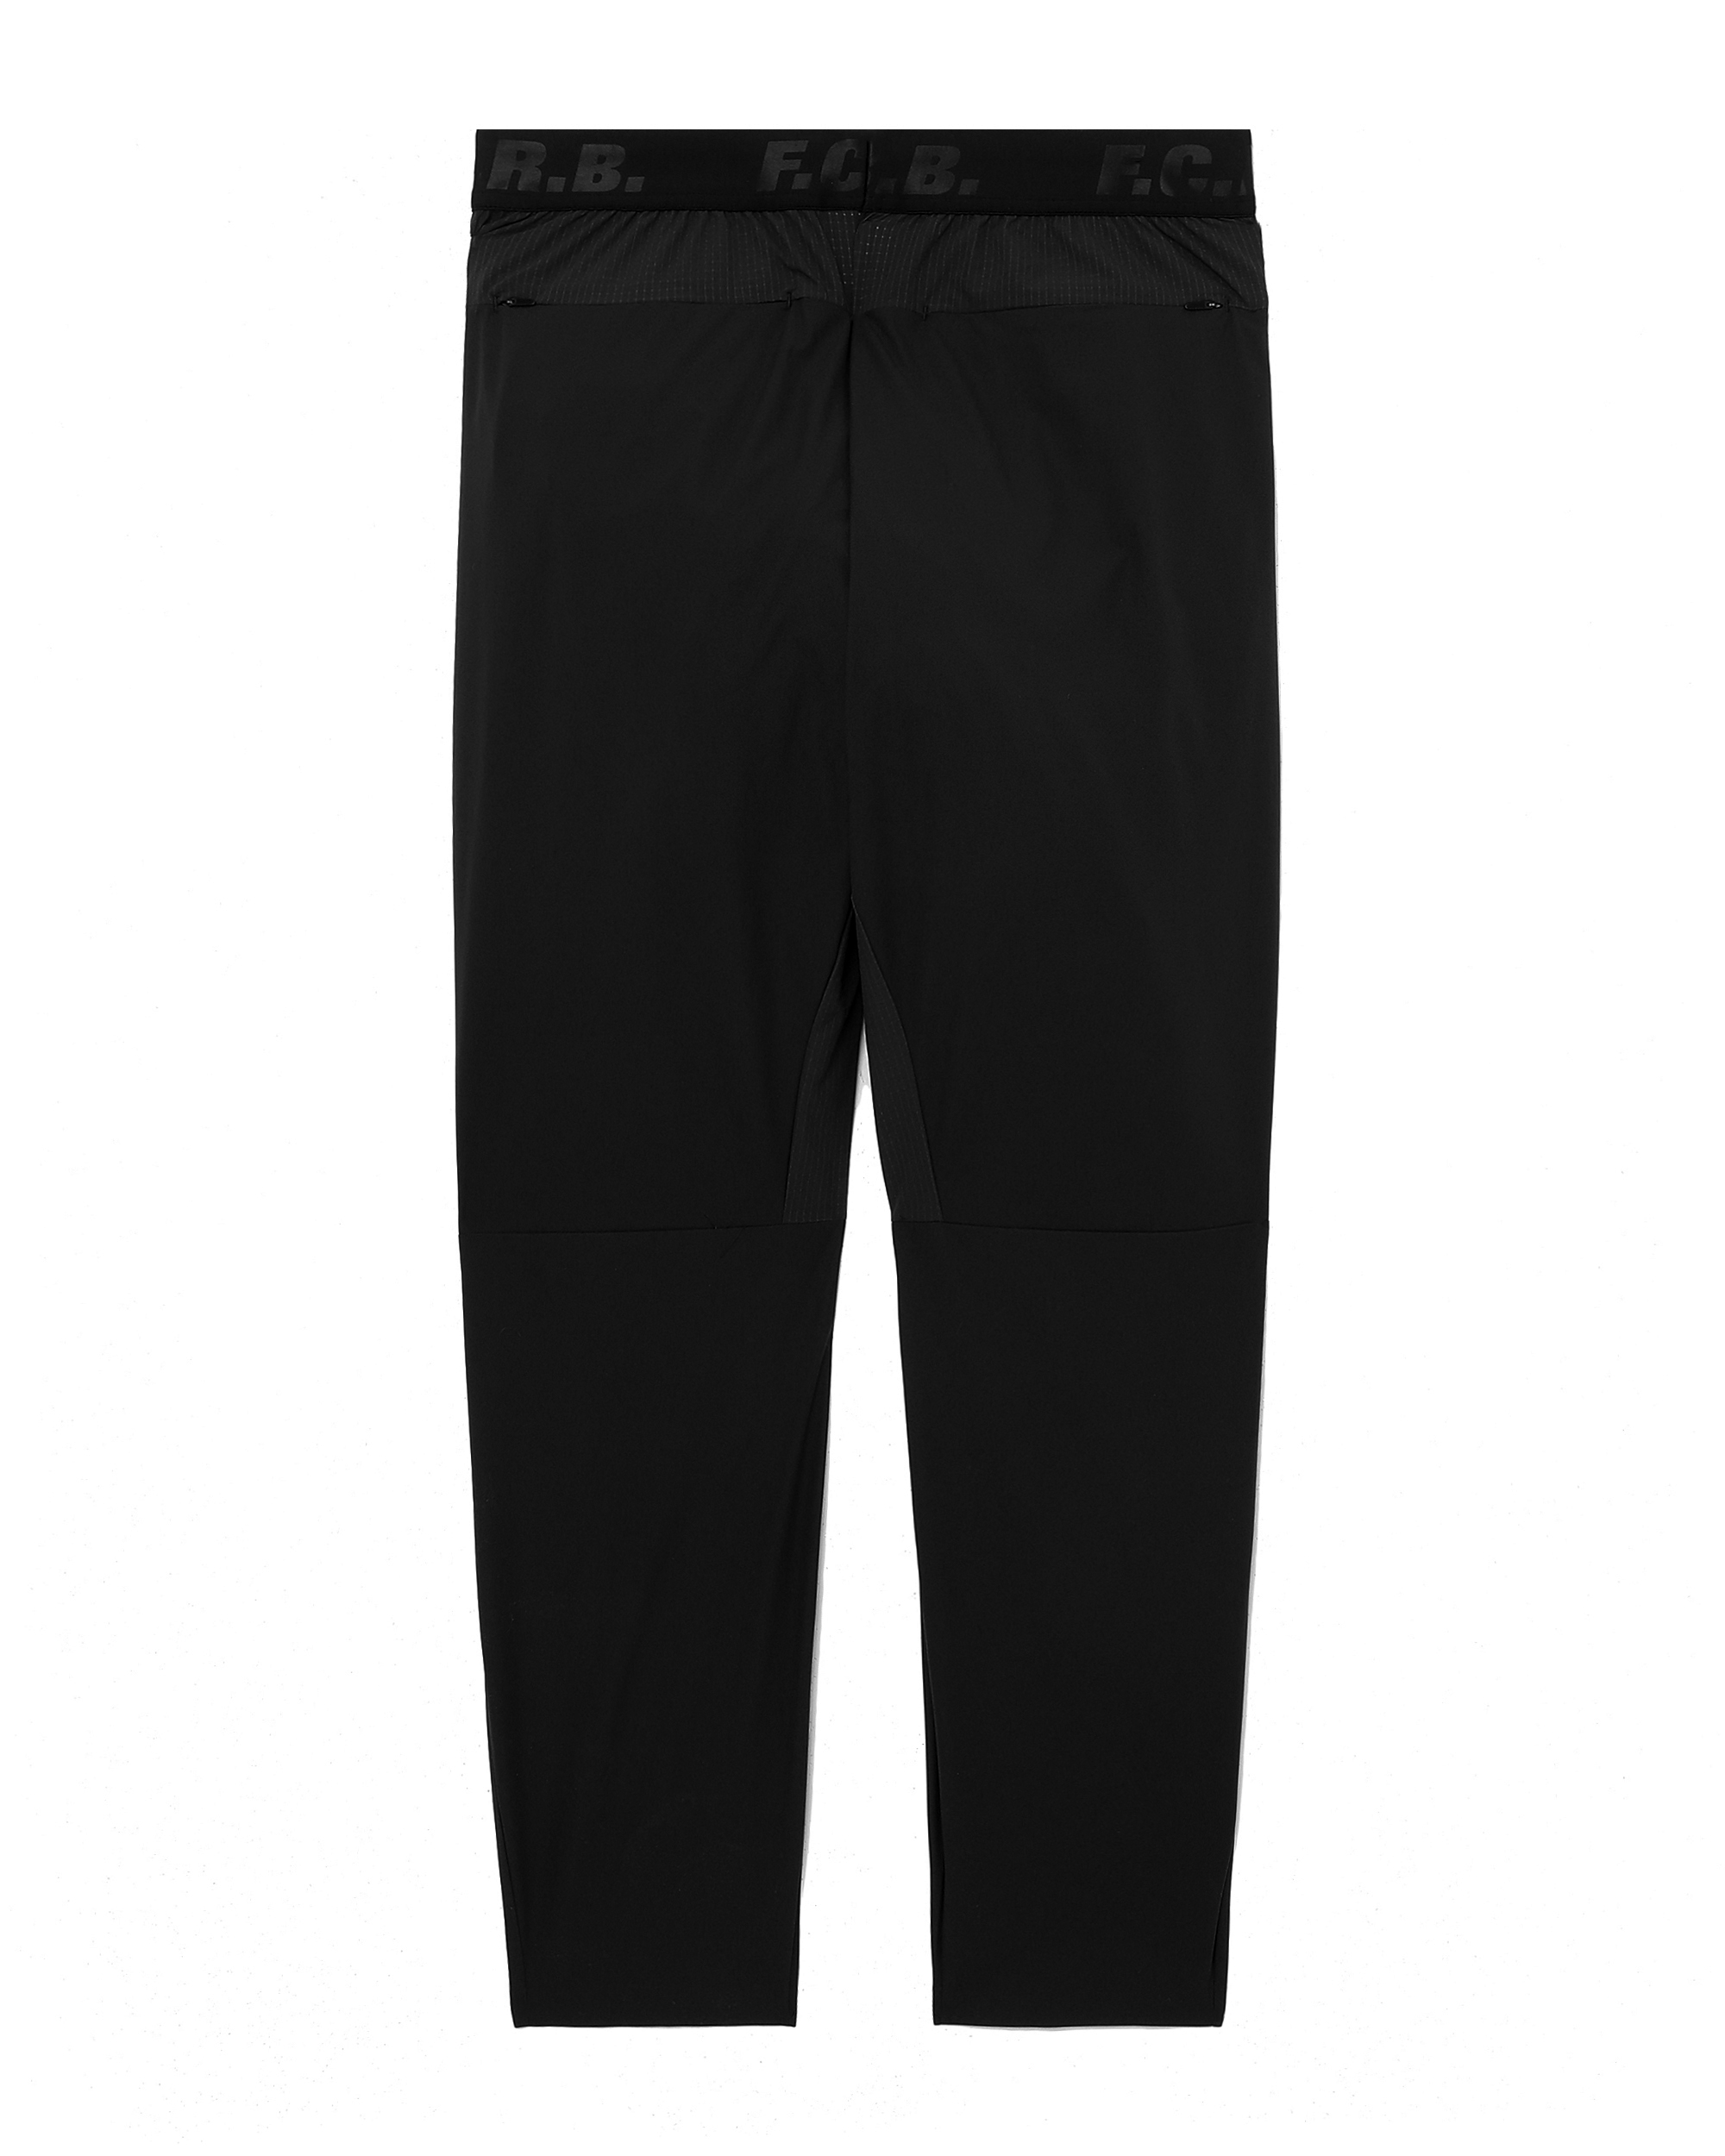 F.C.REAL BRISTOL Stretch lightweight tapered easy pants| ITeSHOP